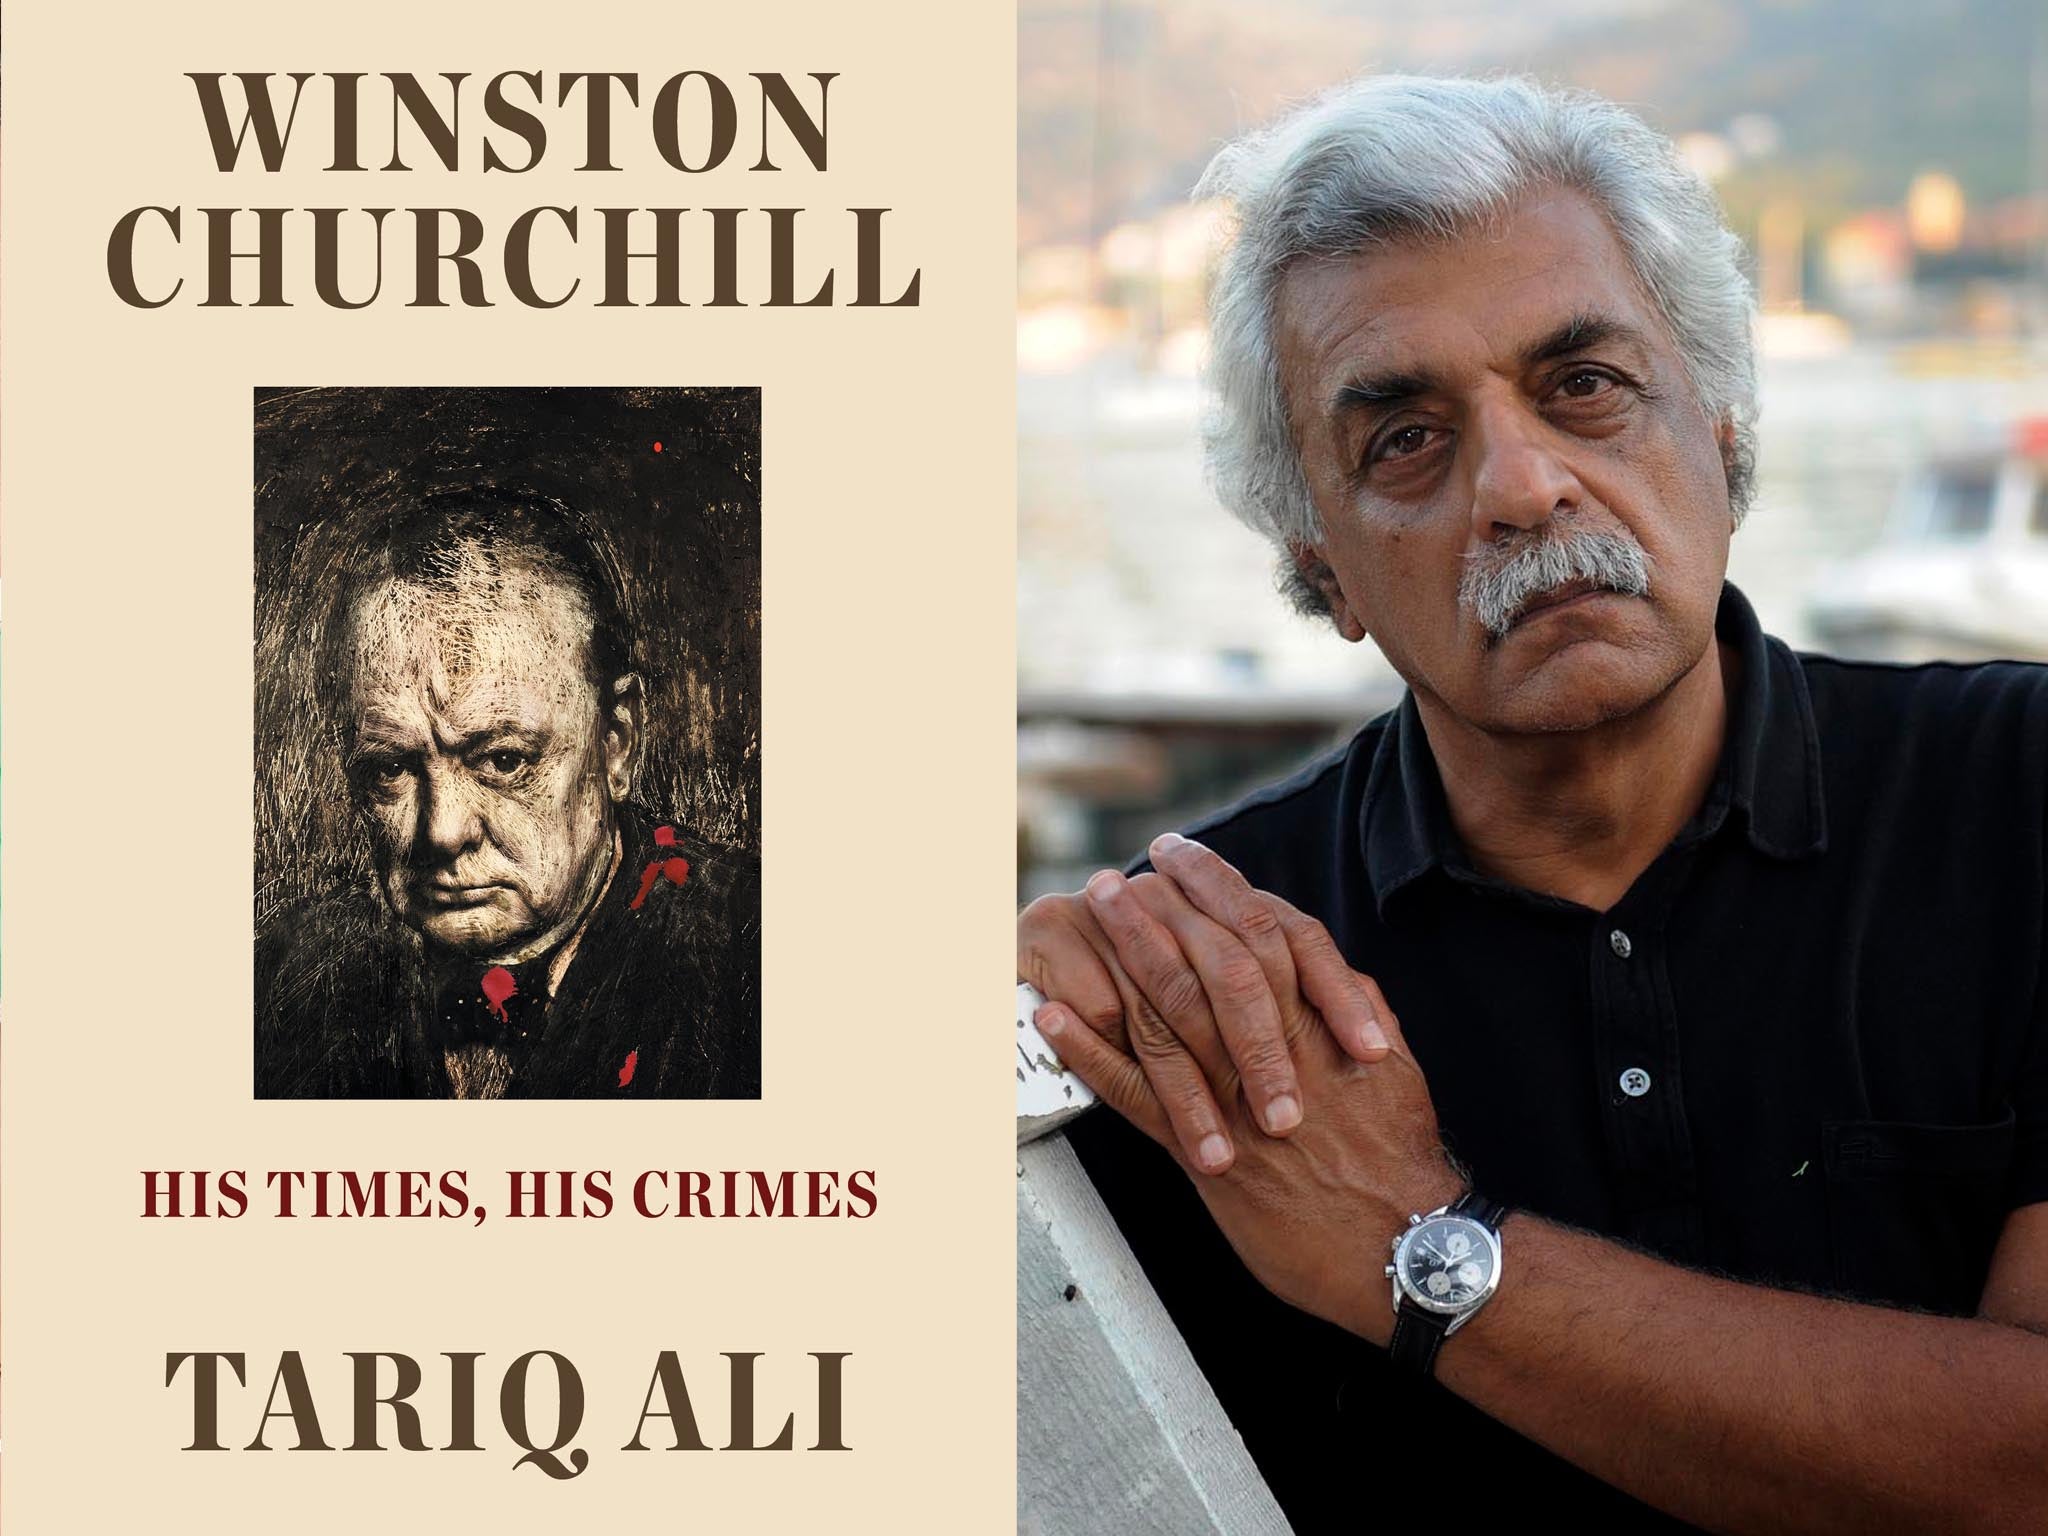 Tariq Ali’s ‘Winston Churchill: His Times, His Crimes’ is an unreserved polemic against the man usually celebrated for standing up to Hitler